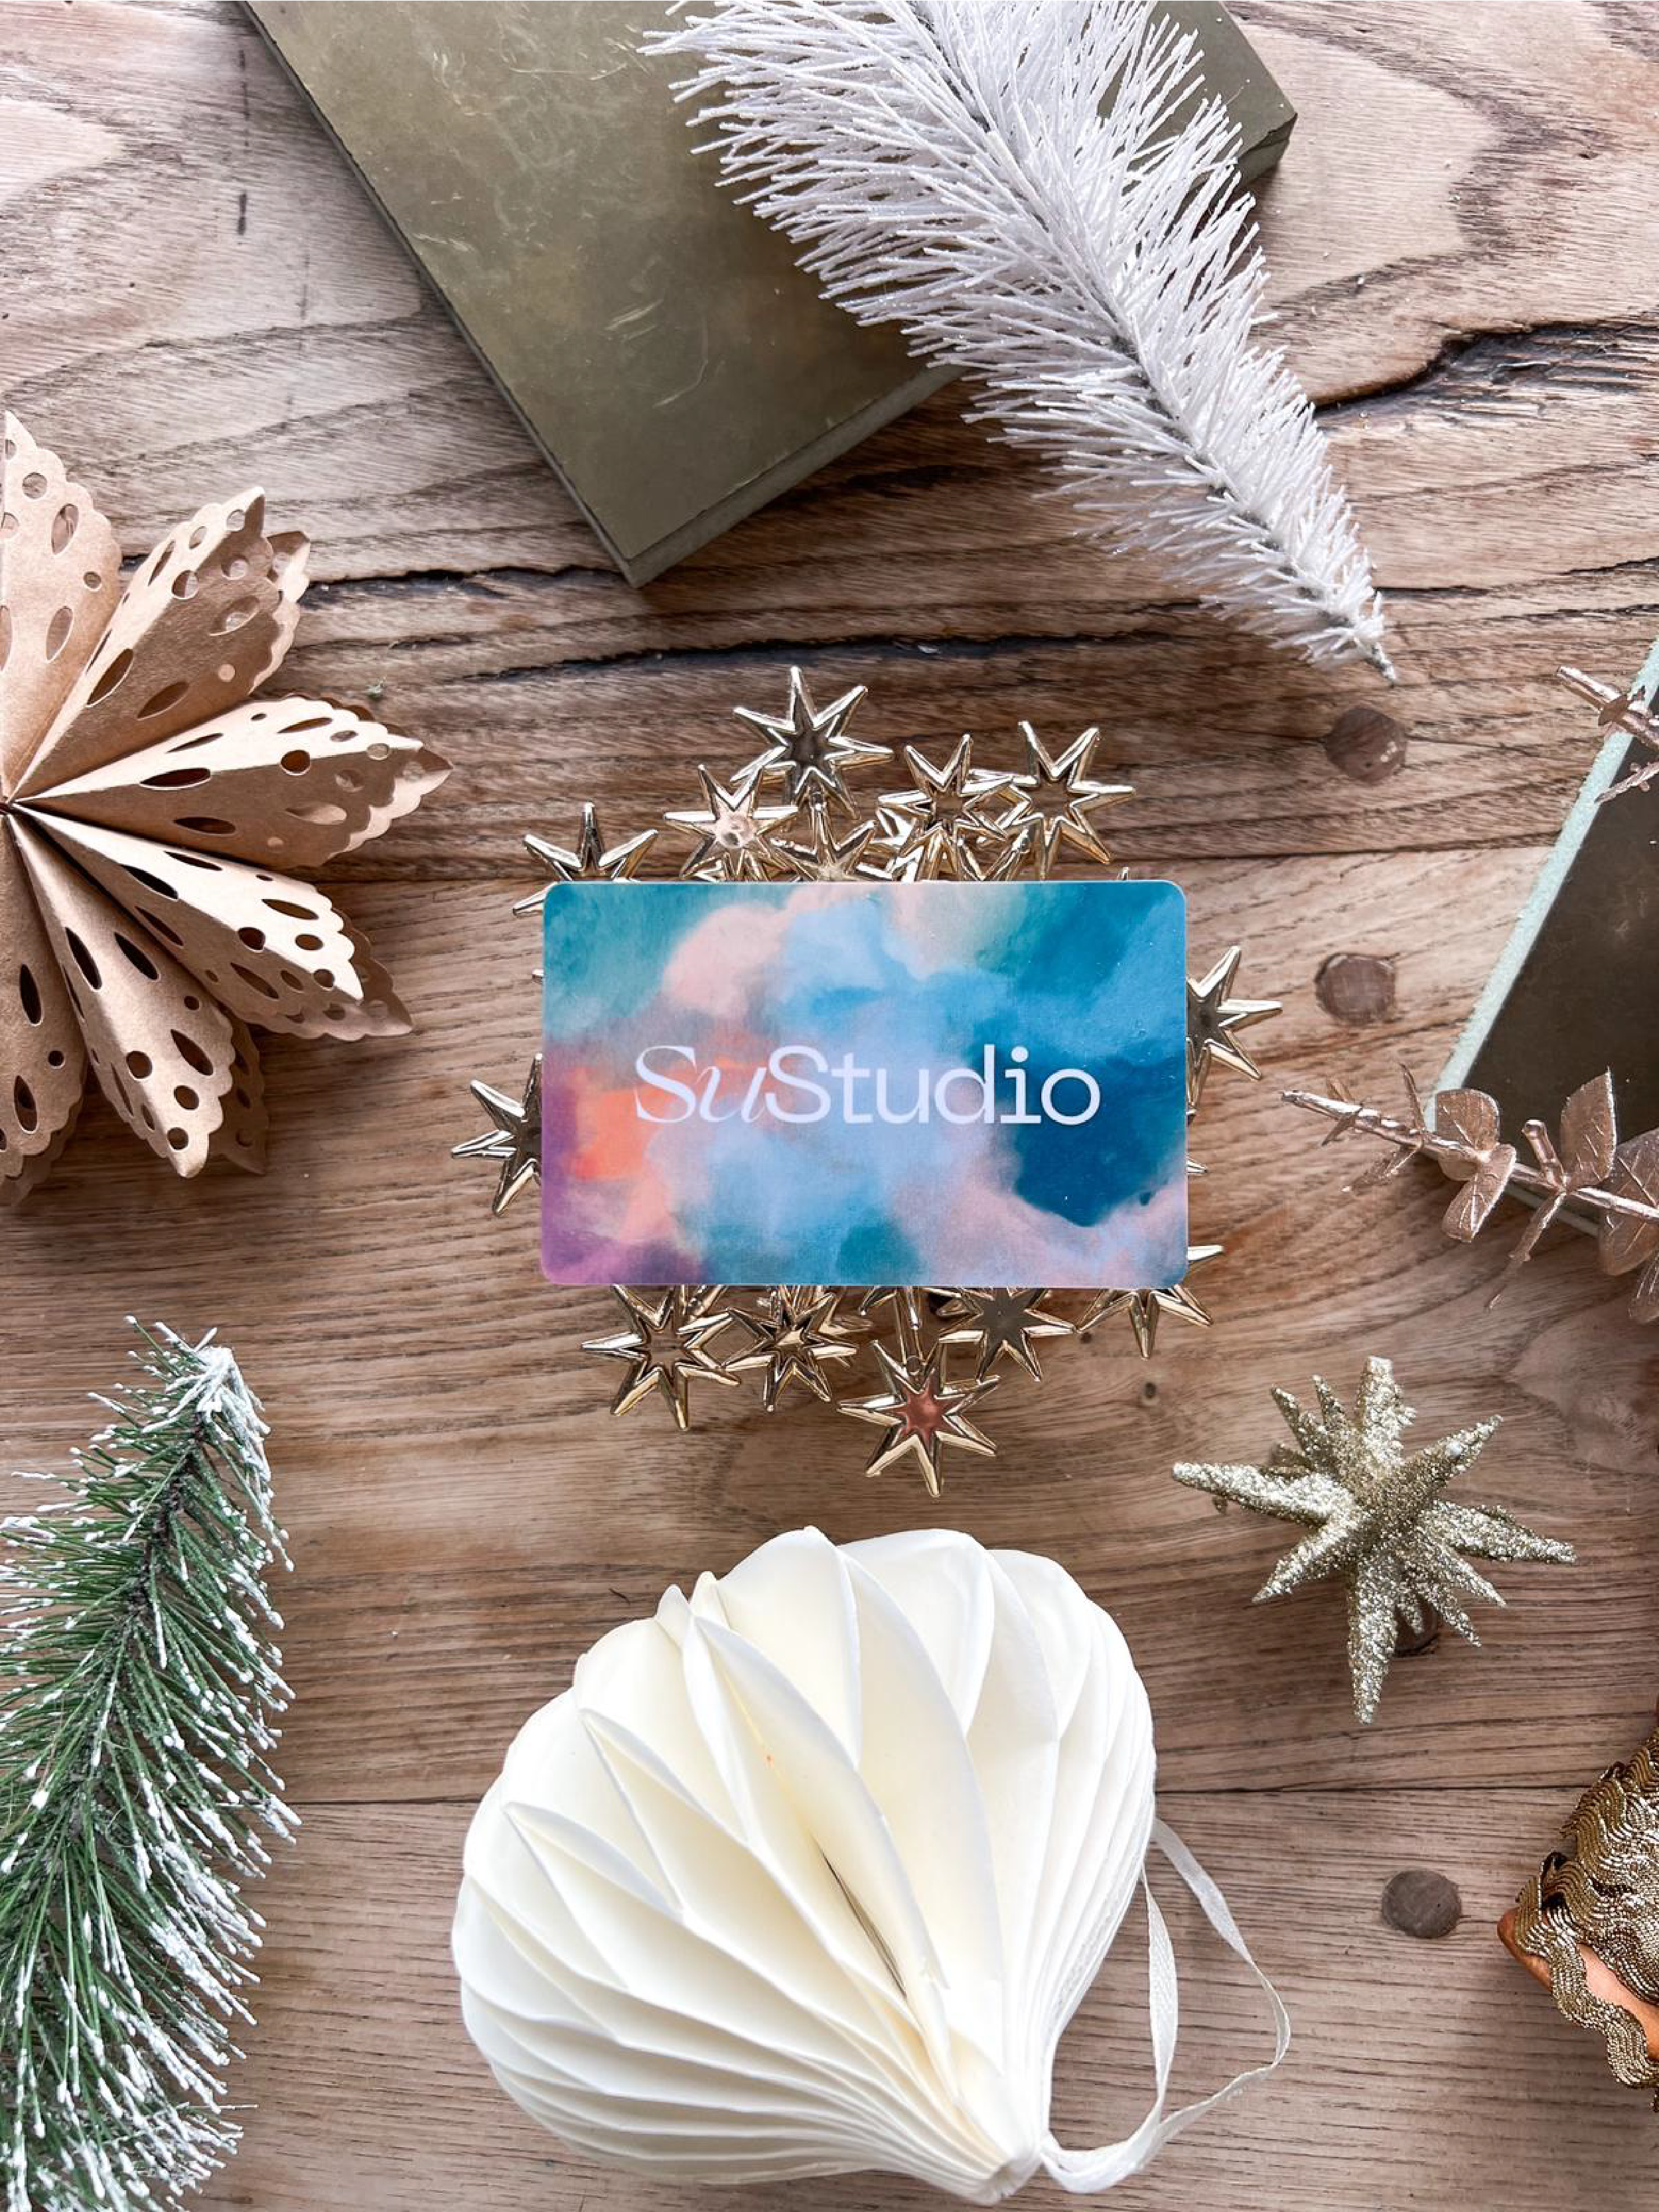 A snazzy membership card and a warm welcome into the Sustudio community